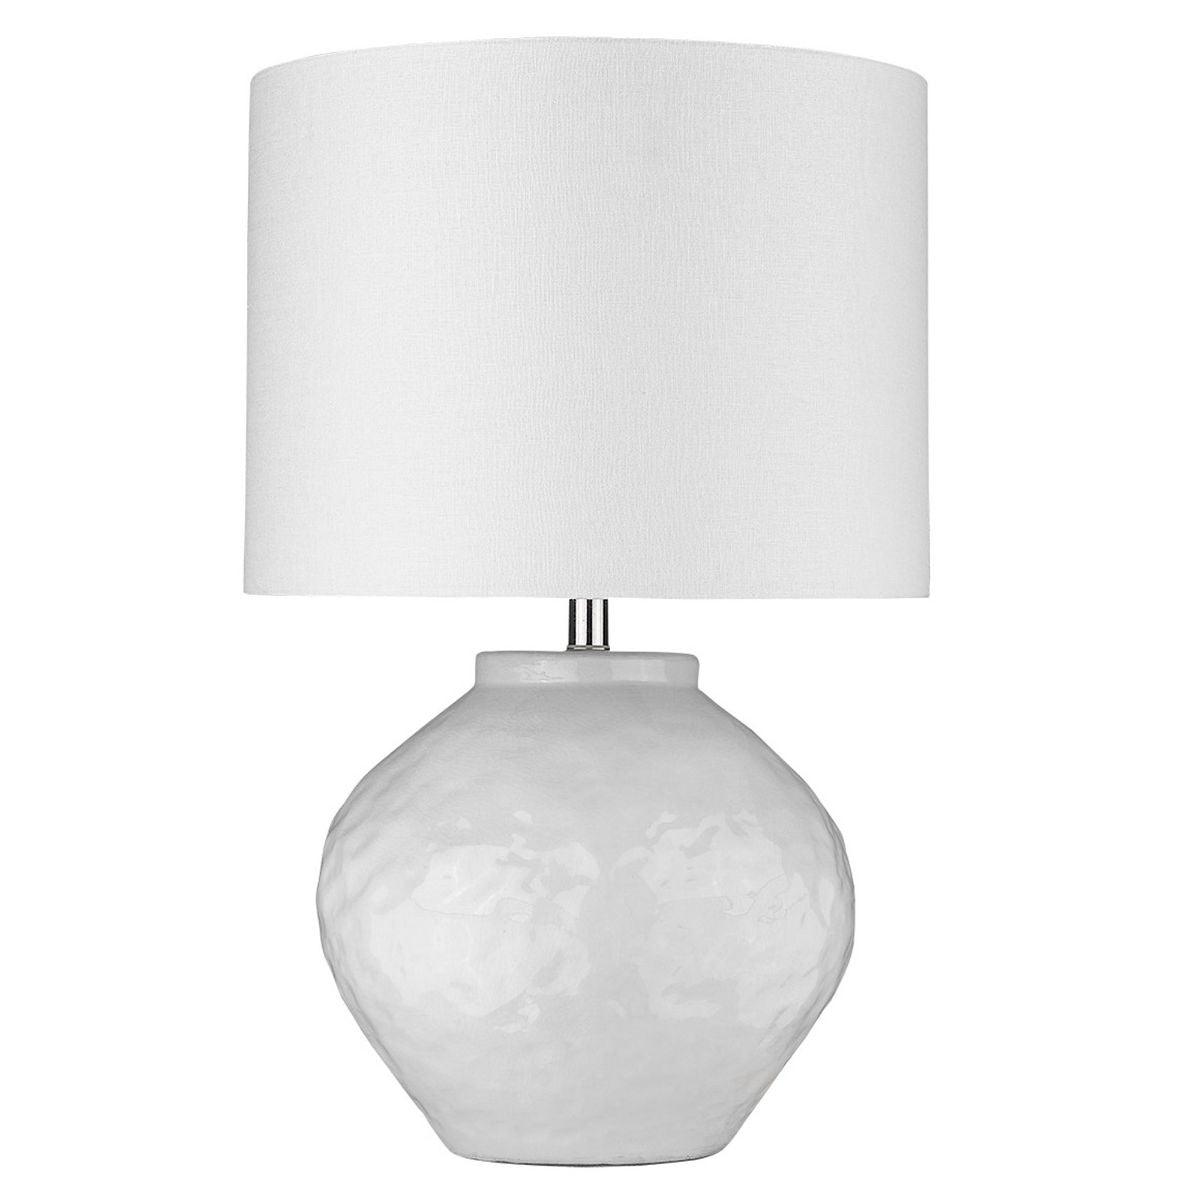 Trend Home 1 Light 26 inches Table Lamp White Hammered Ceramic Body and Polished Nickel Accents